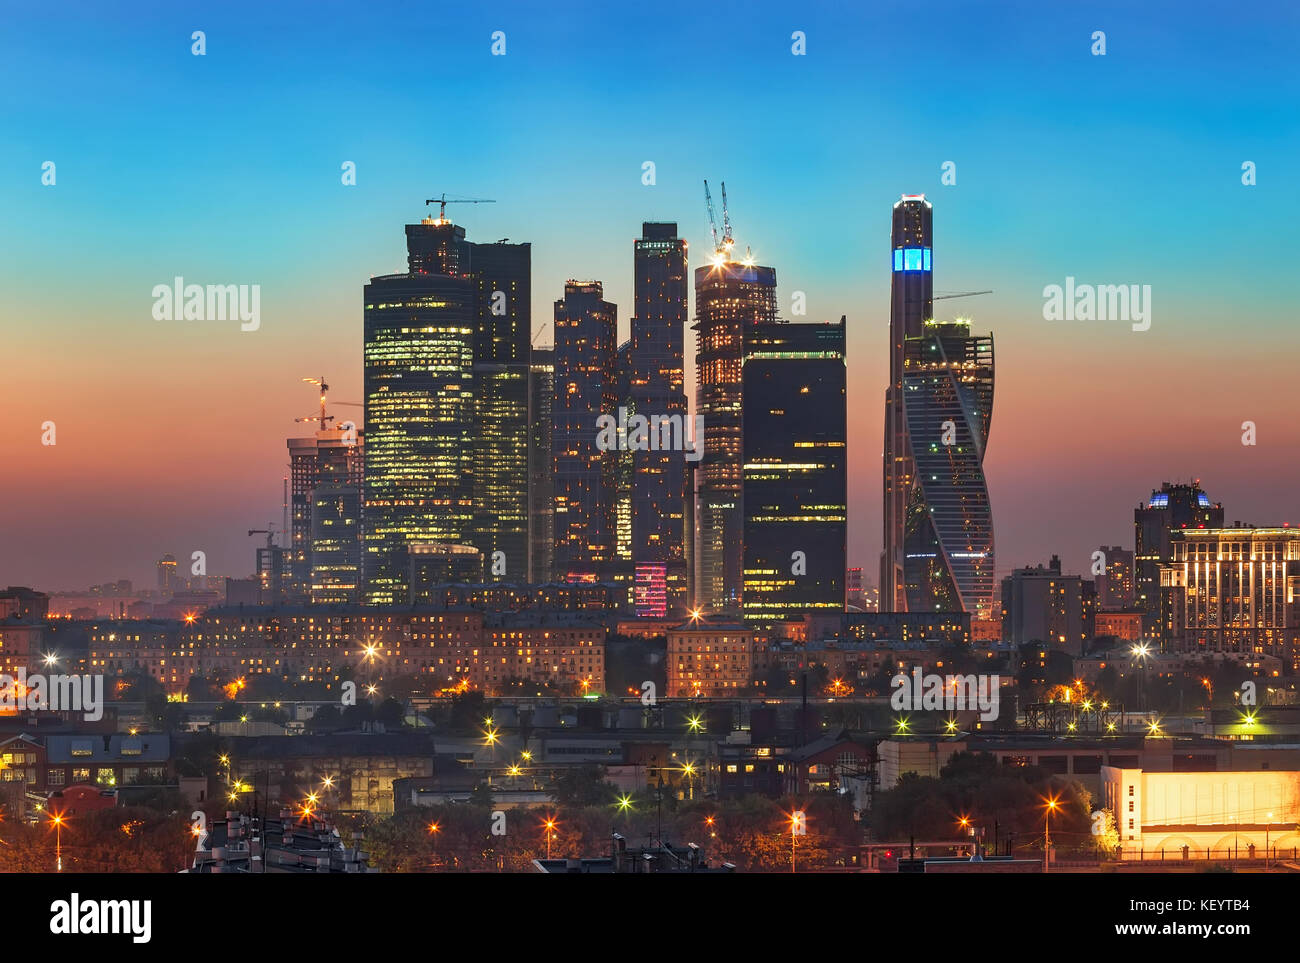 Top view of Moscow city skyline at night Stock Photo